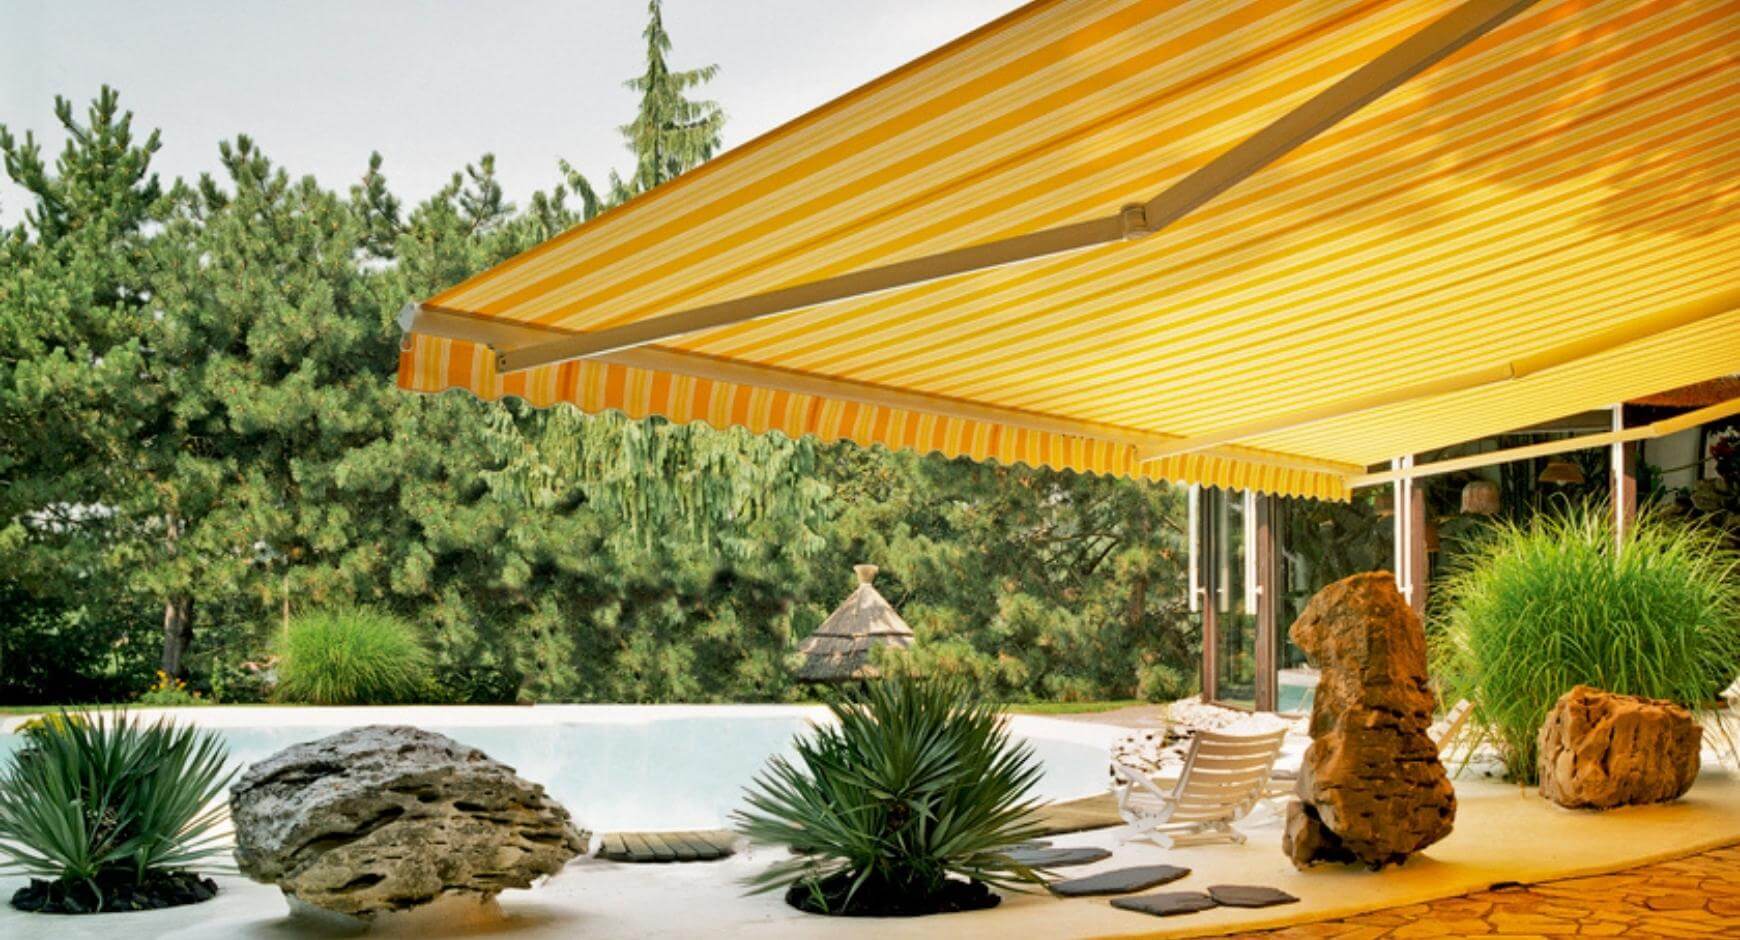 bright yellow awning over rock garden